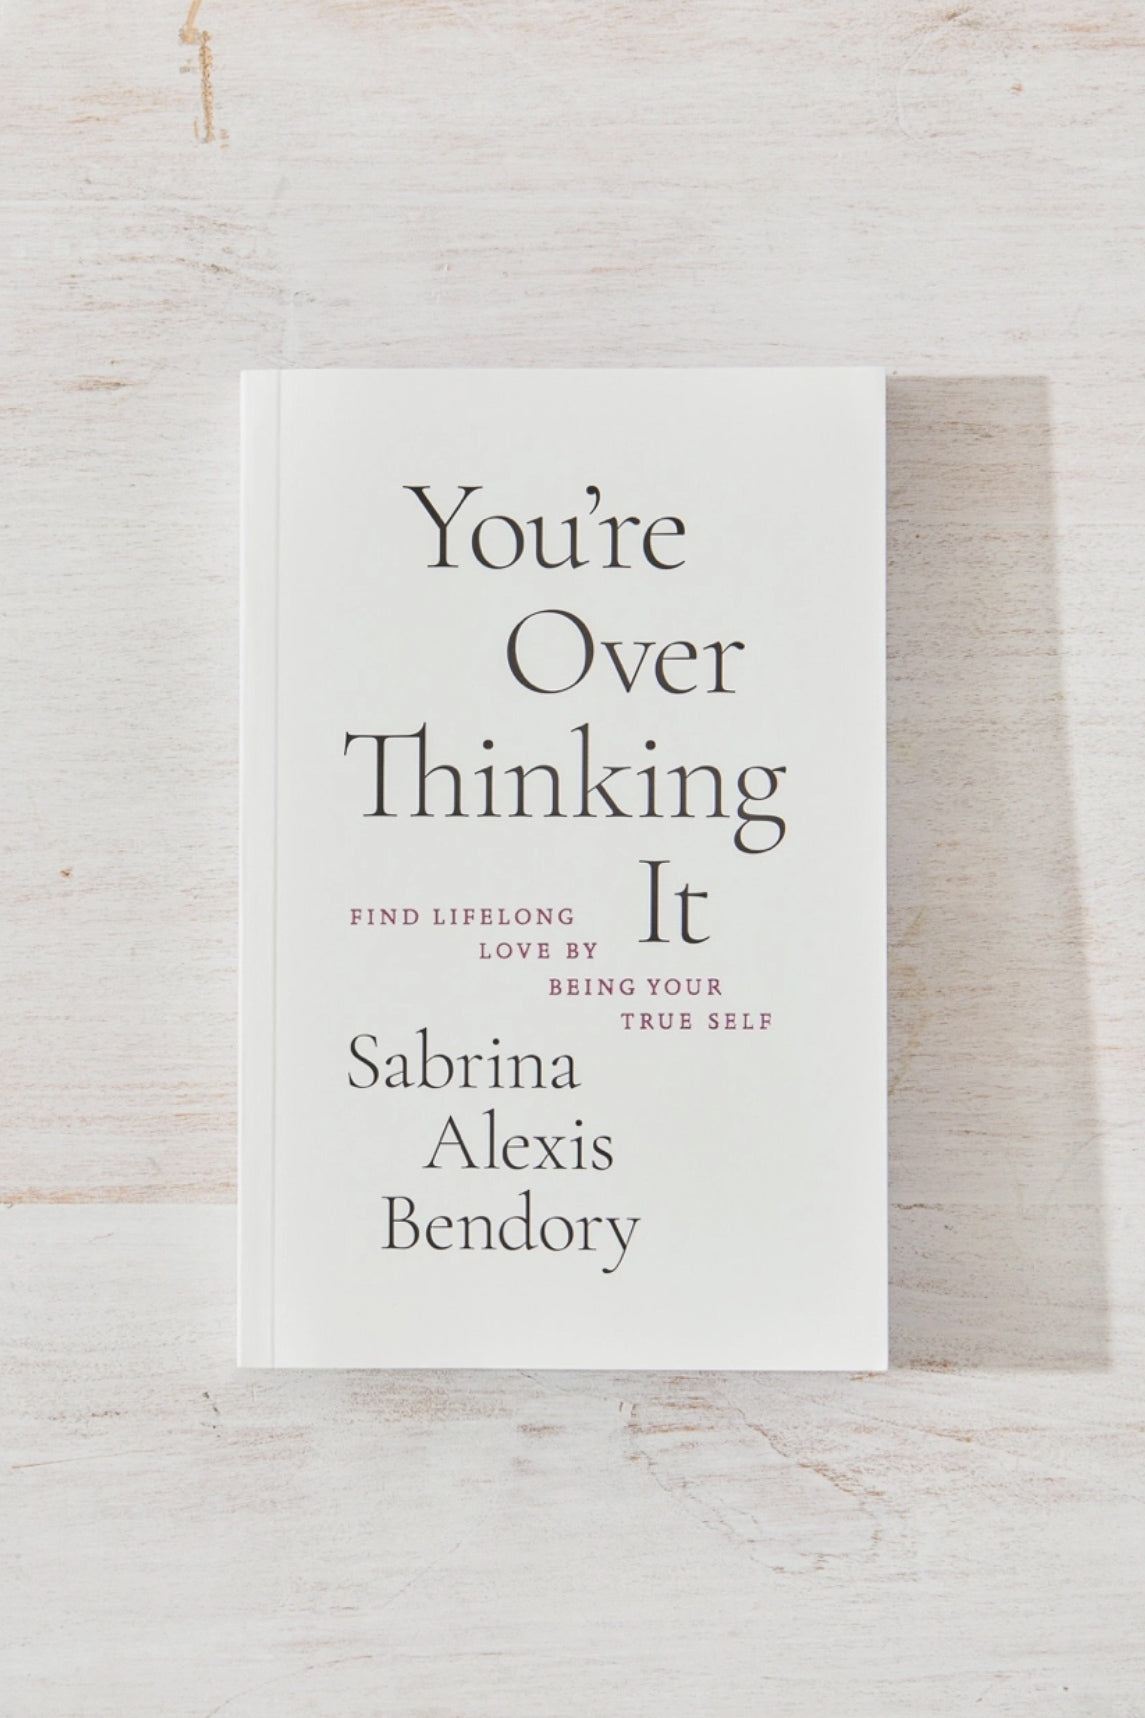 You're Overthinking It Book